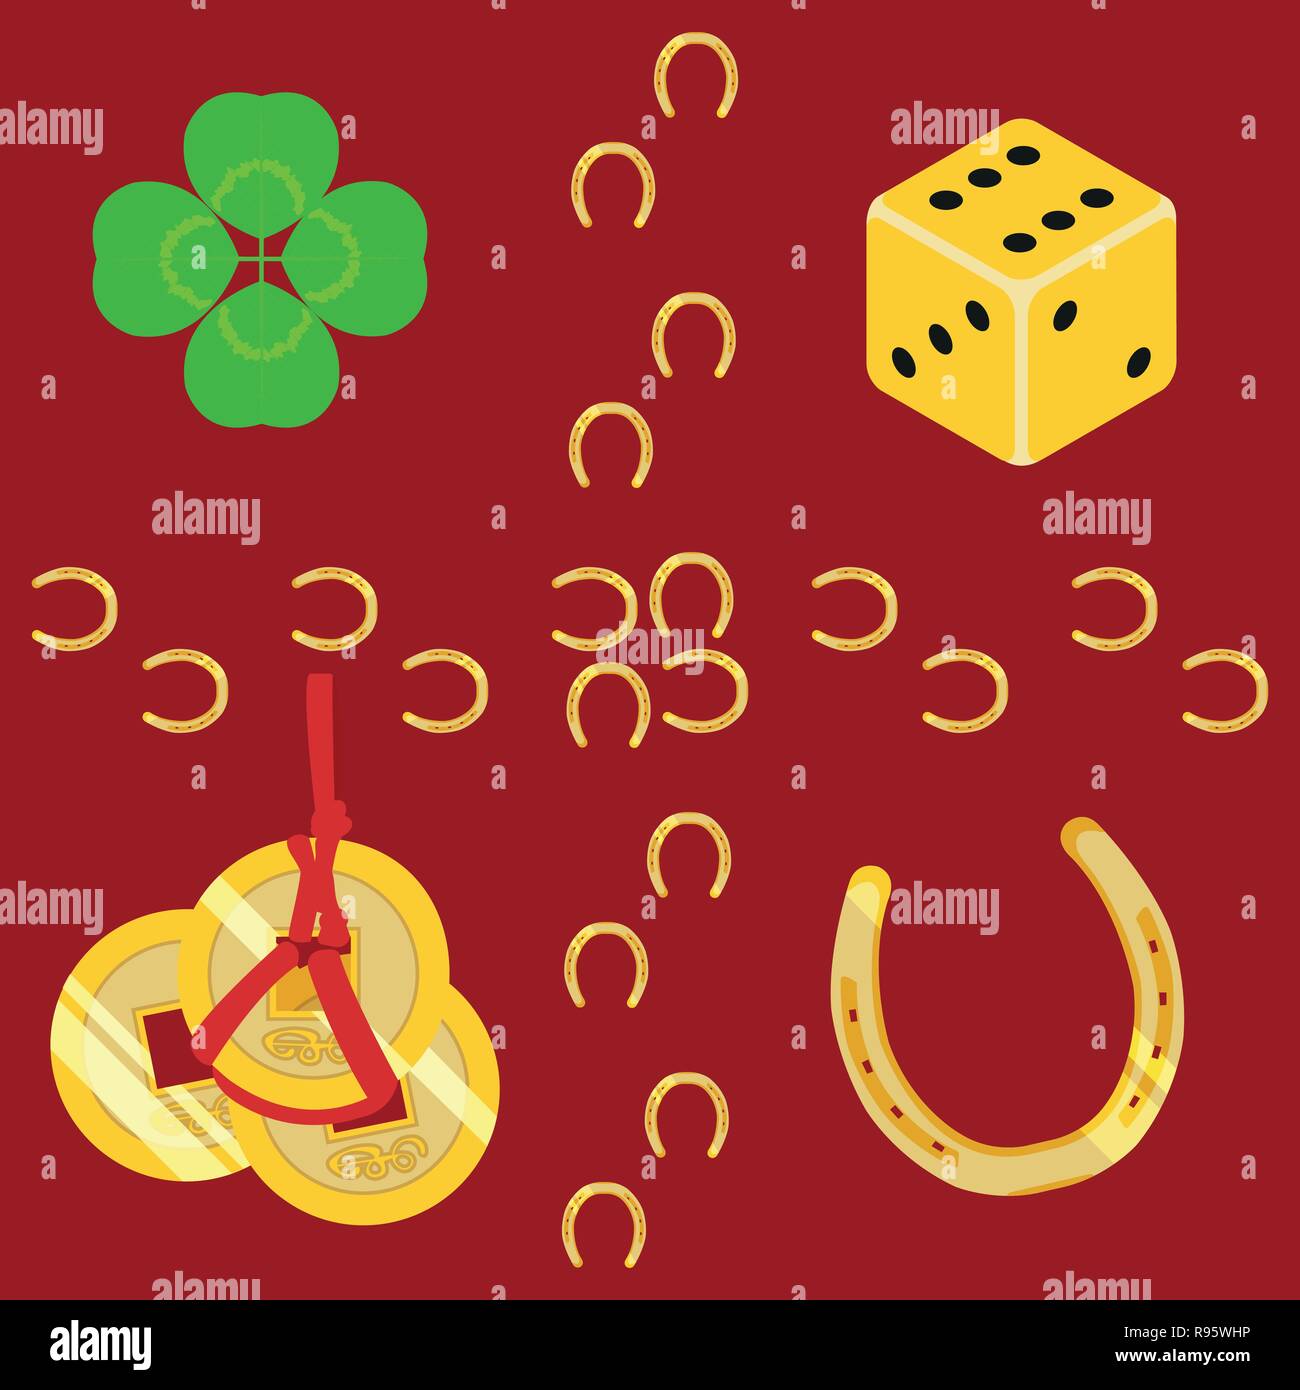 Luck symbols clover, hinese coins, dice and horseshoe. Vector seamless pattern or set of graphic design elements. Flat style objects. Stock Vector